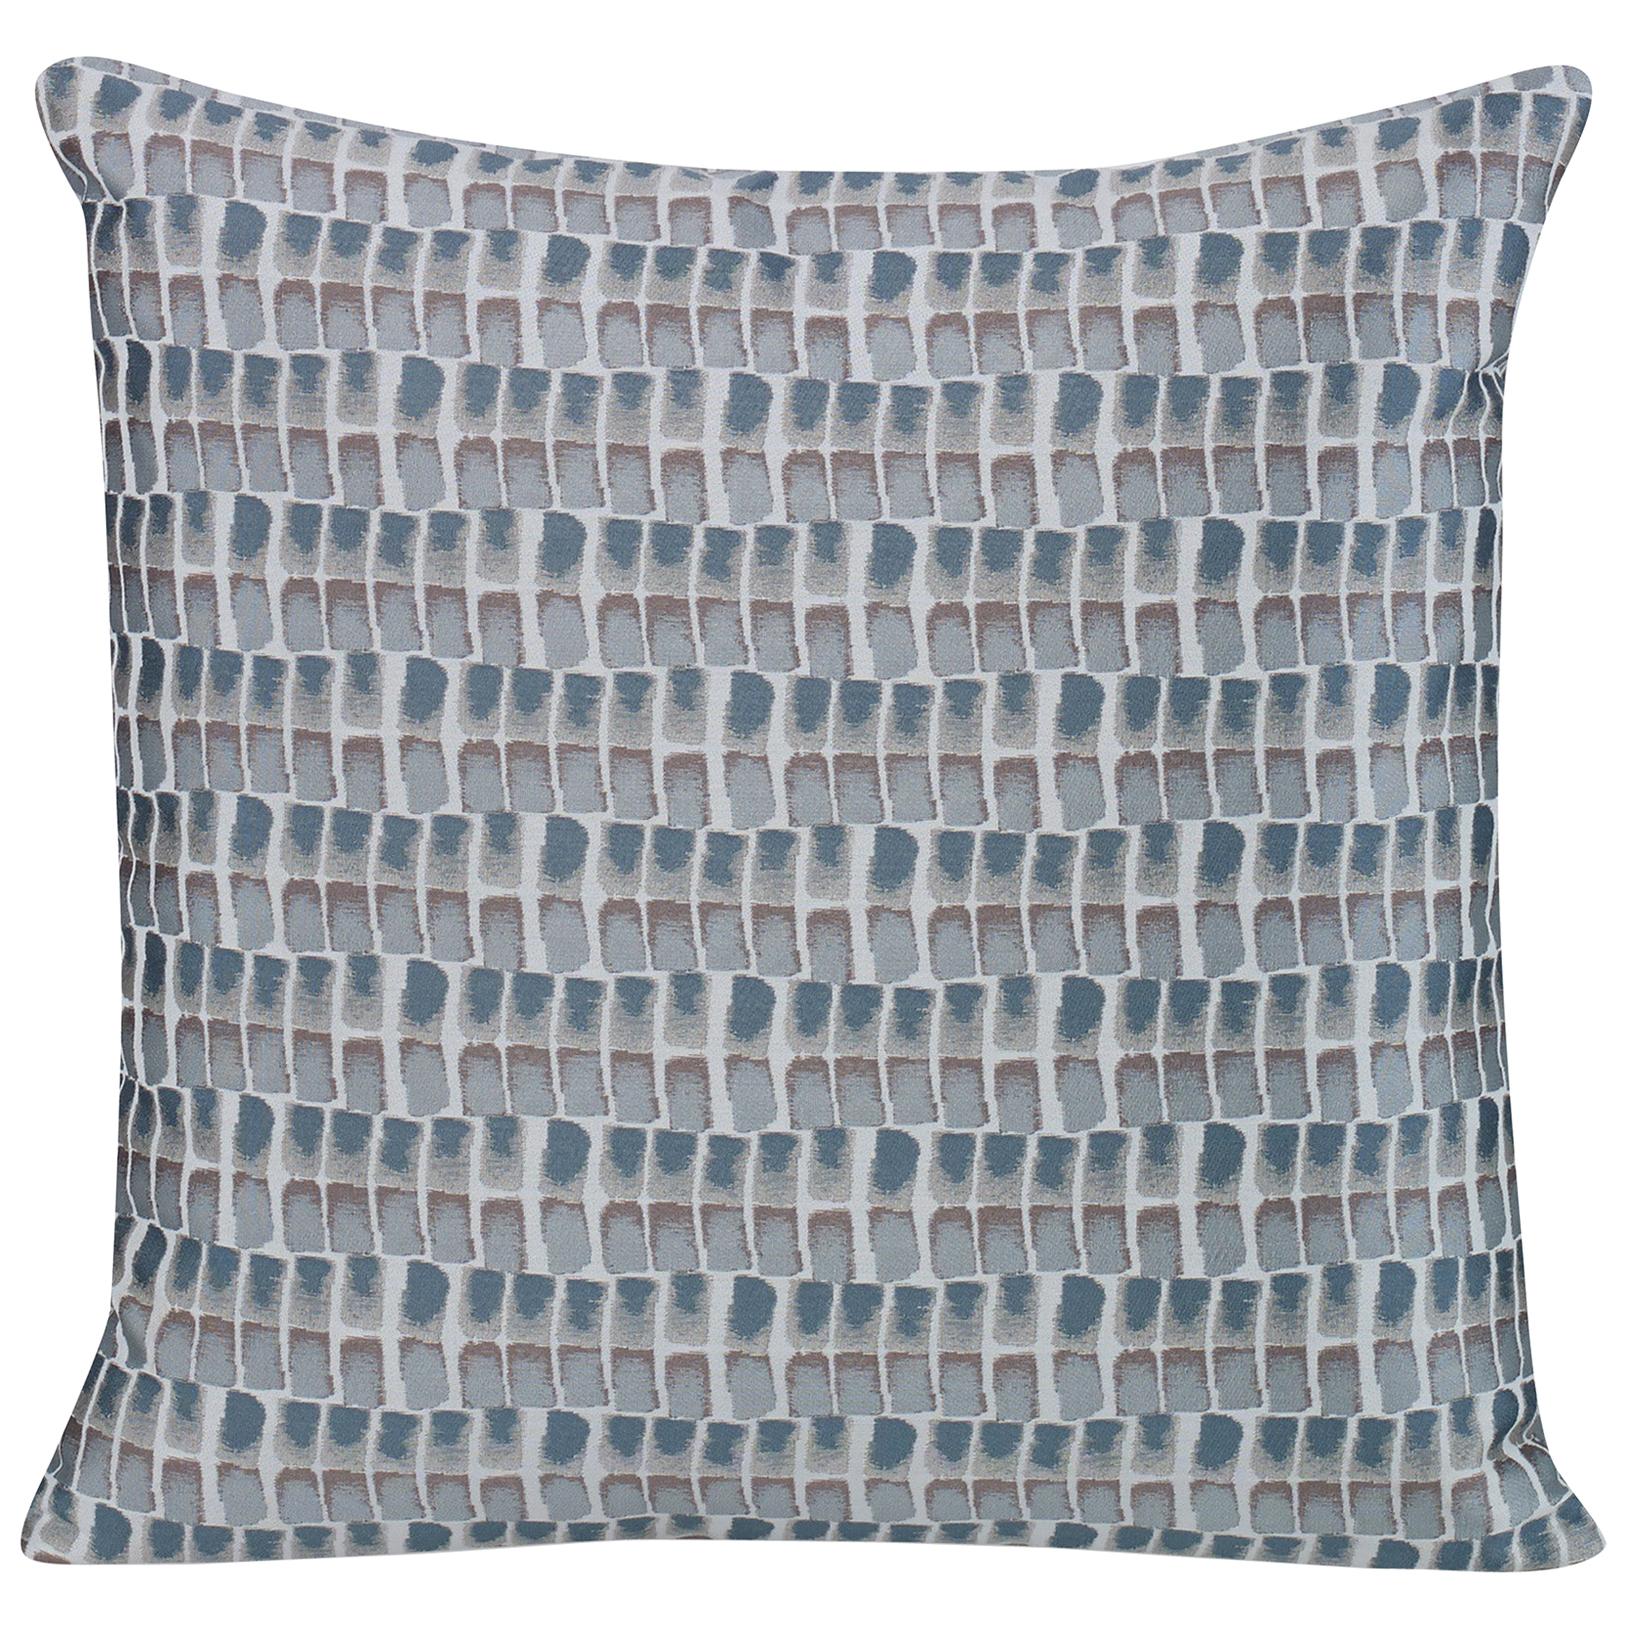 Shortstack Pillow in Gray and Blue by CuratedKravet